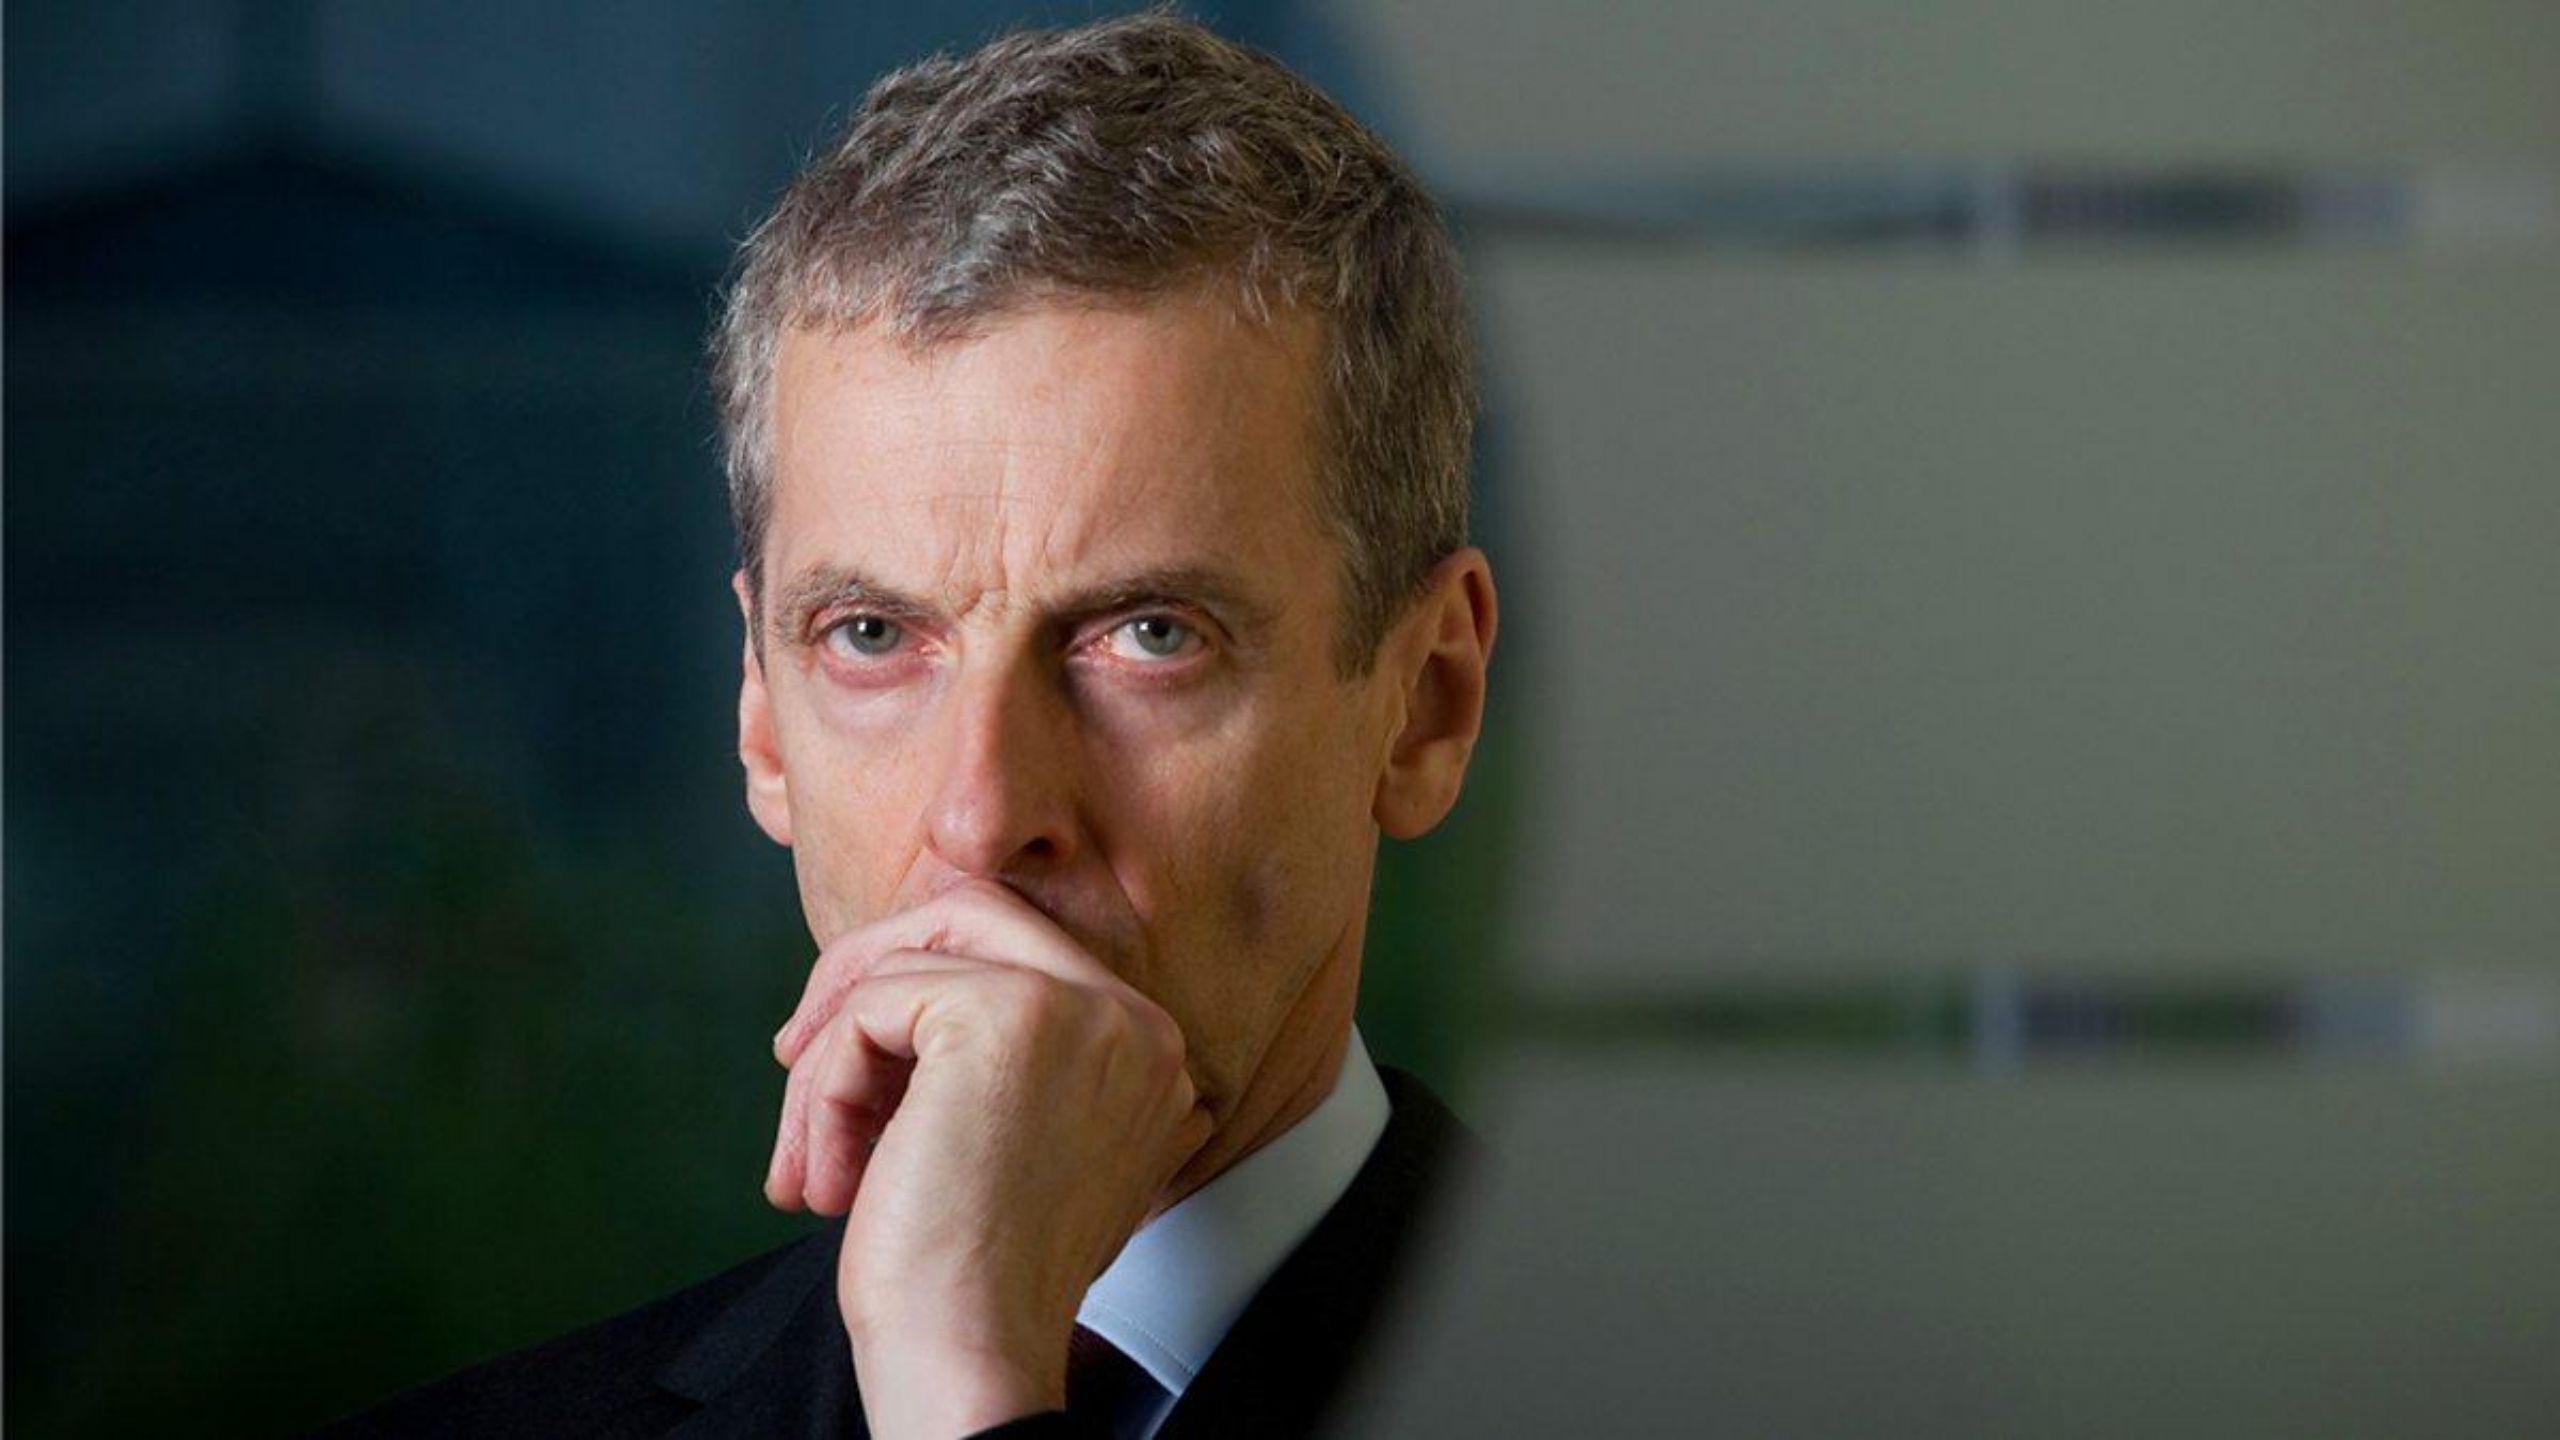 Headshot of Peter Capaldi deep in thought against a blurred background